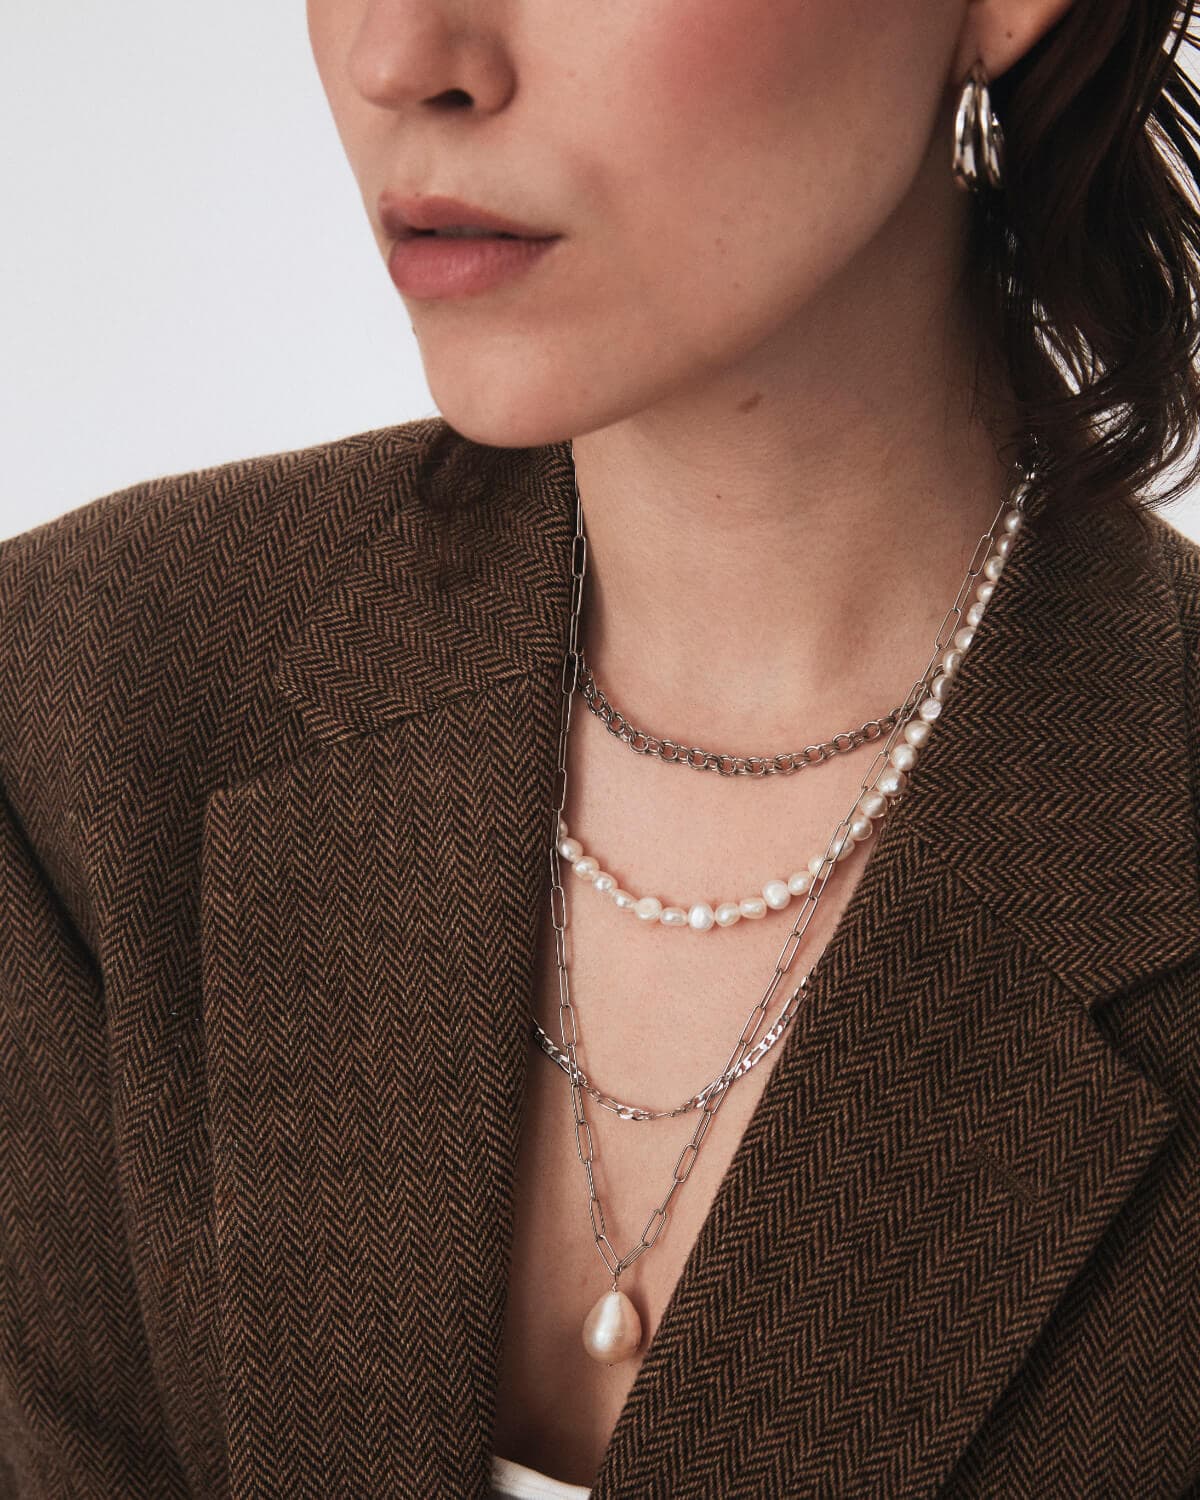 Pearl necklace and silver chains on a model